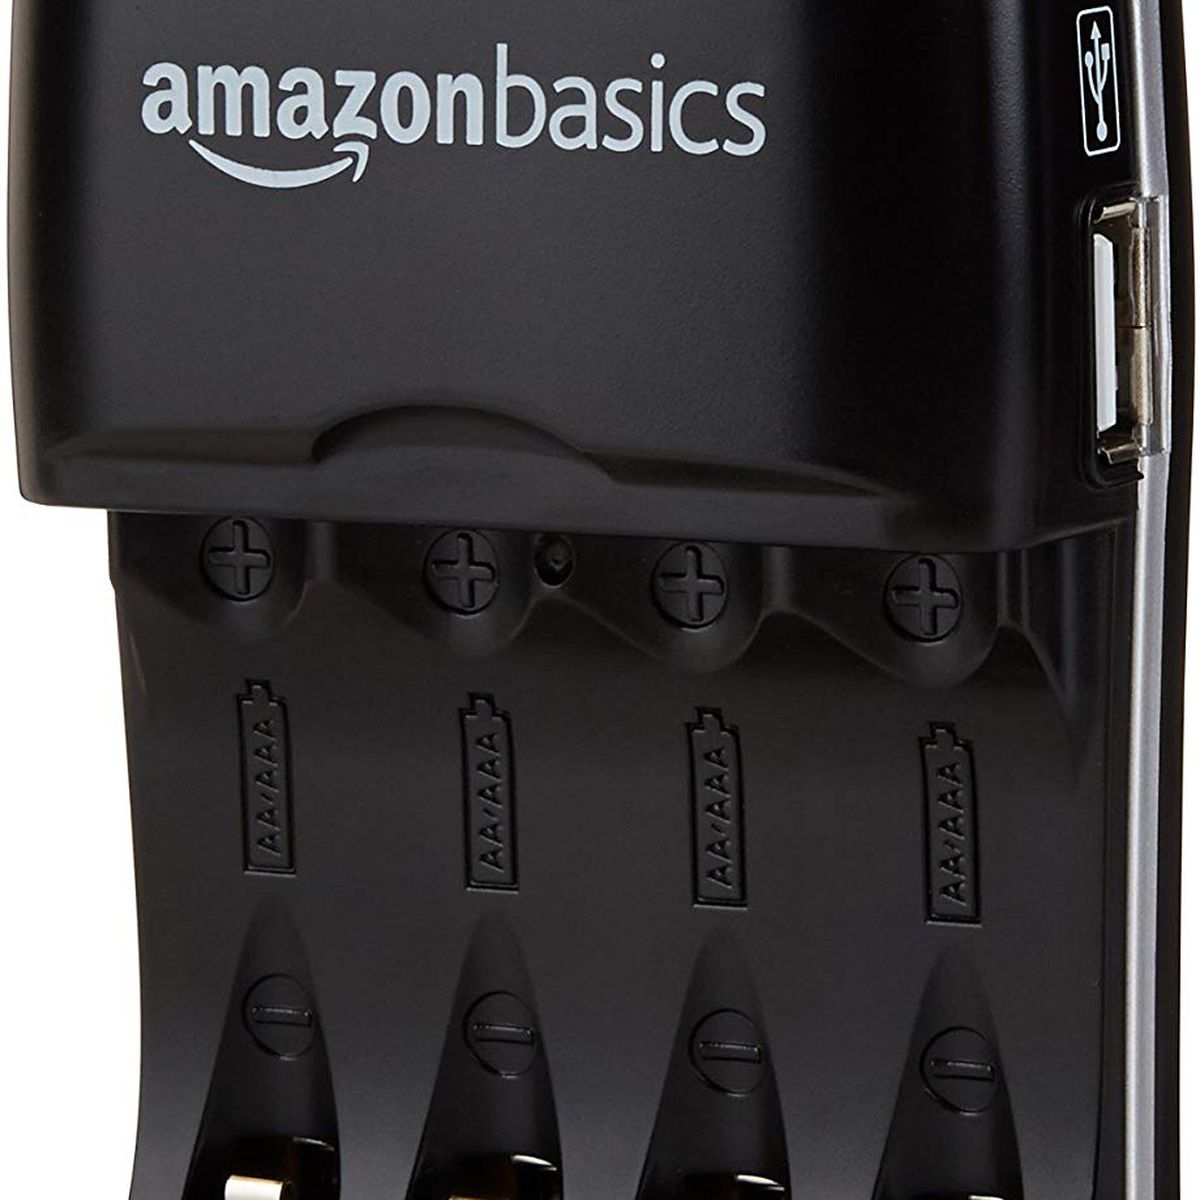 A product shot of the Amazon Basics battery charger